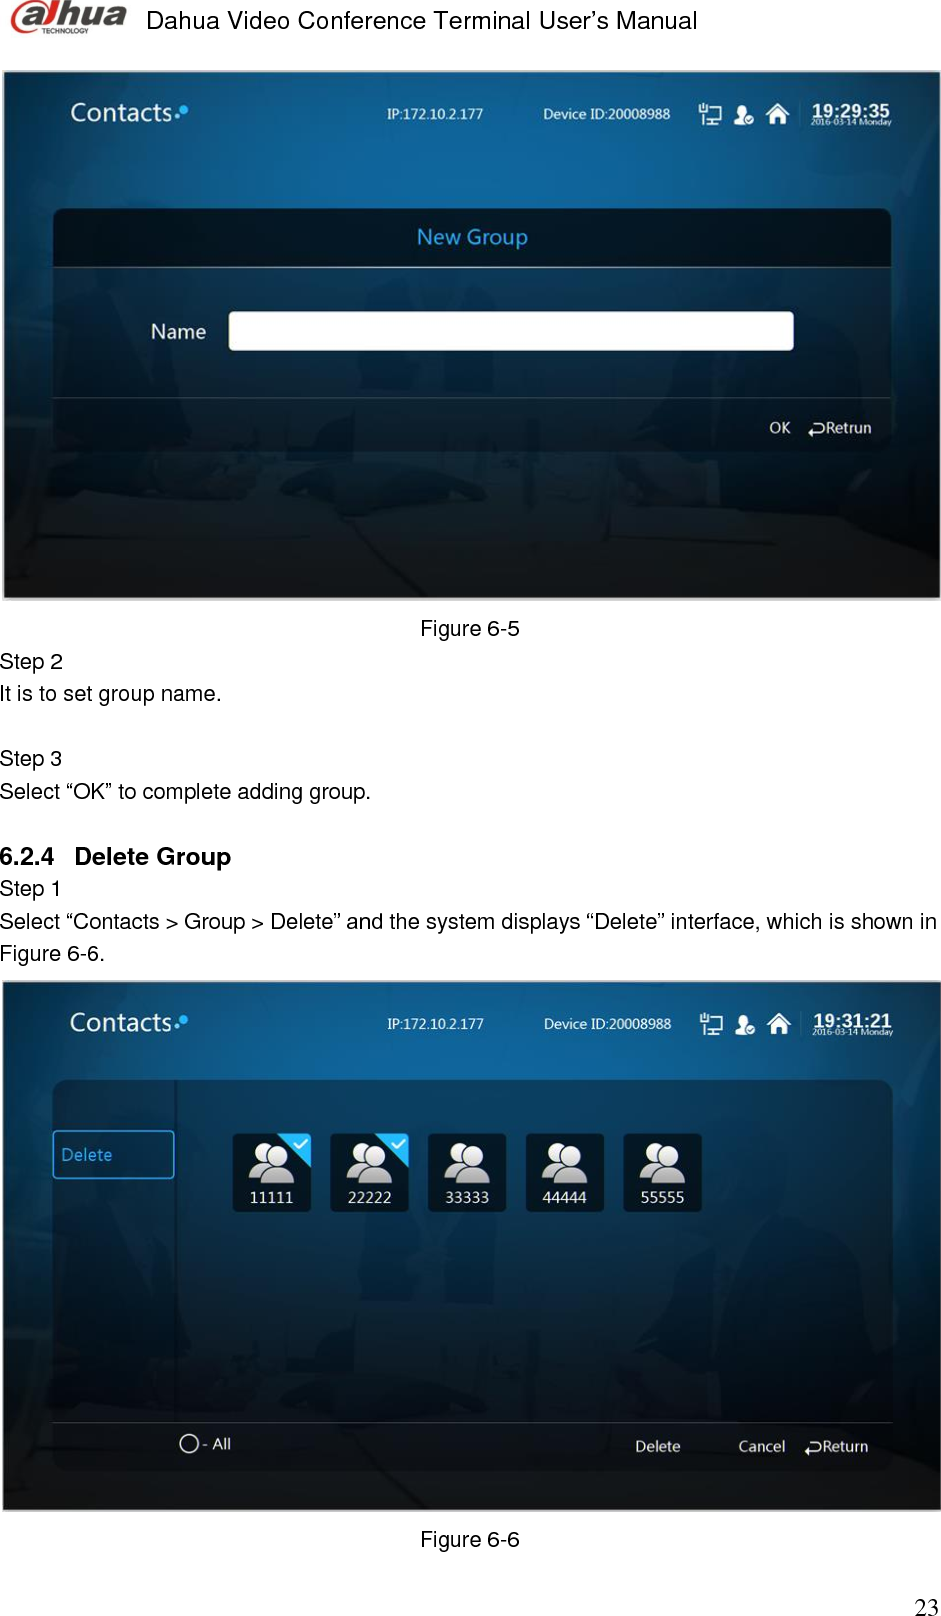  Dahua Video Conference Terminal User’s Manual                                                                              23  Figure 6-5 Step 2  It is to set group name.   Step 3  Select “OK” to complete adding group.   6.2.4  Delete Group  Step 1  Select “Contacts &gt; Group &gt; Delete” and the system displays “Delete” interface, which is shown in Figure 6-6.   Figure 6-6 